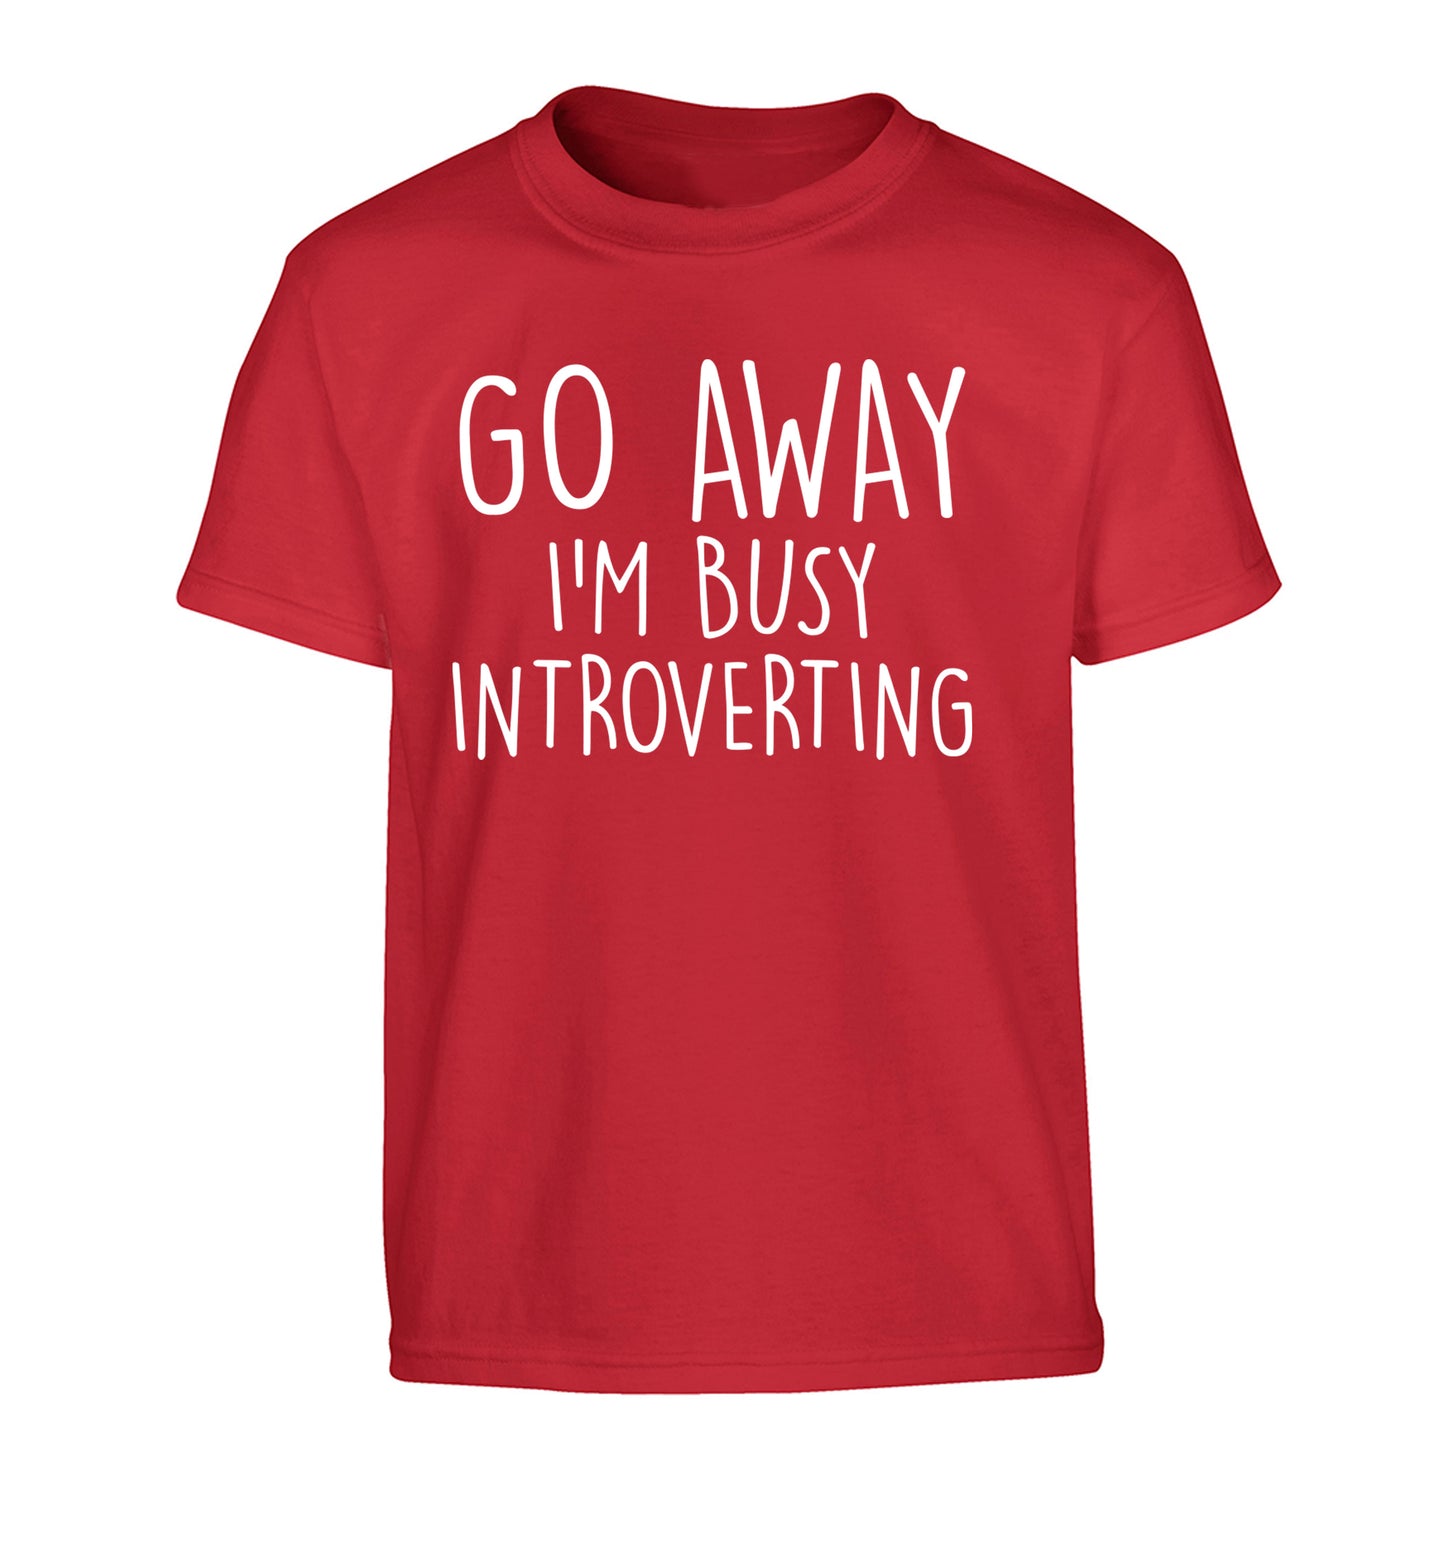 Go away I'm busy introverting Children's red Tshirt 12-13 Years